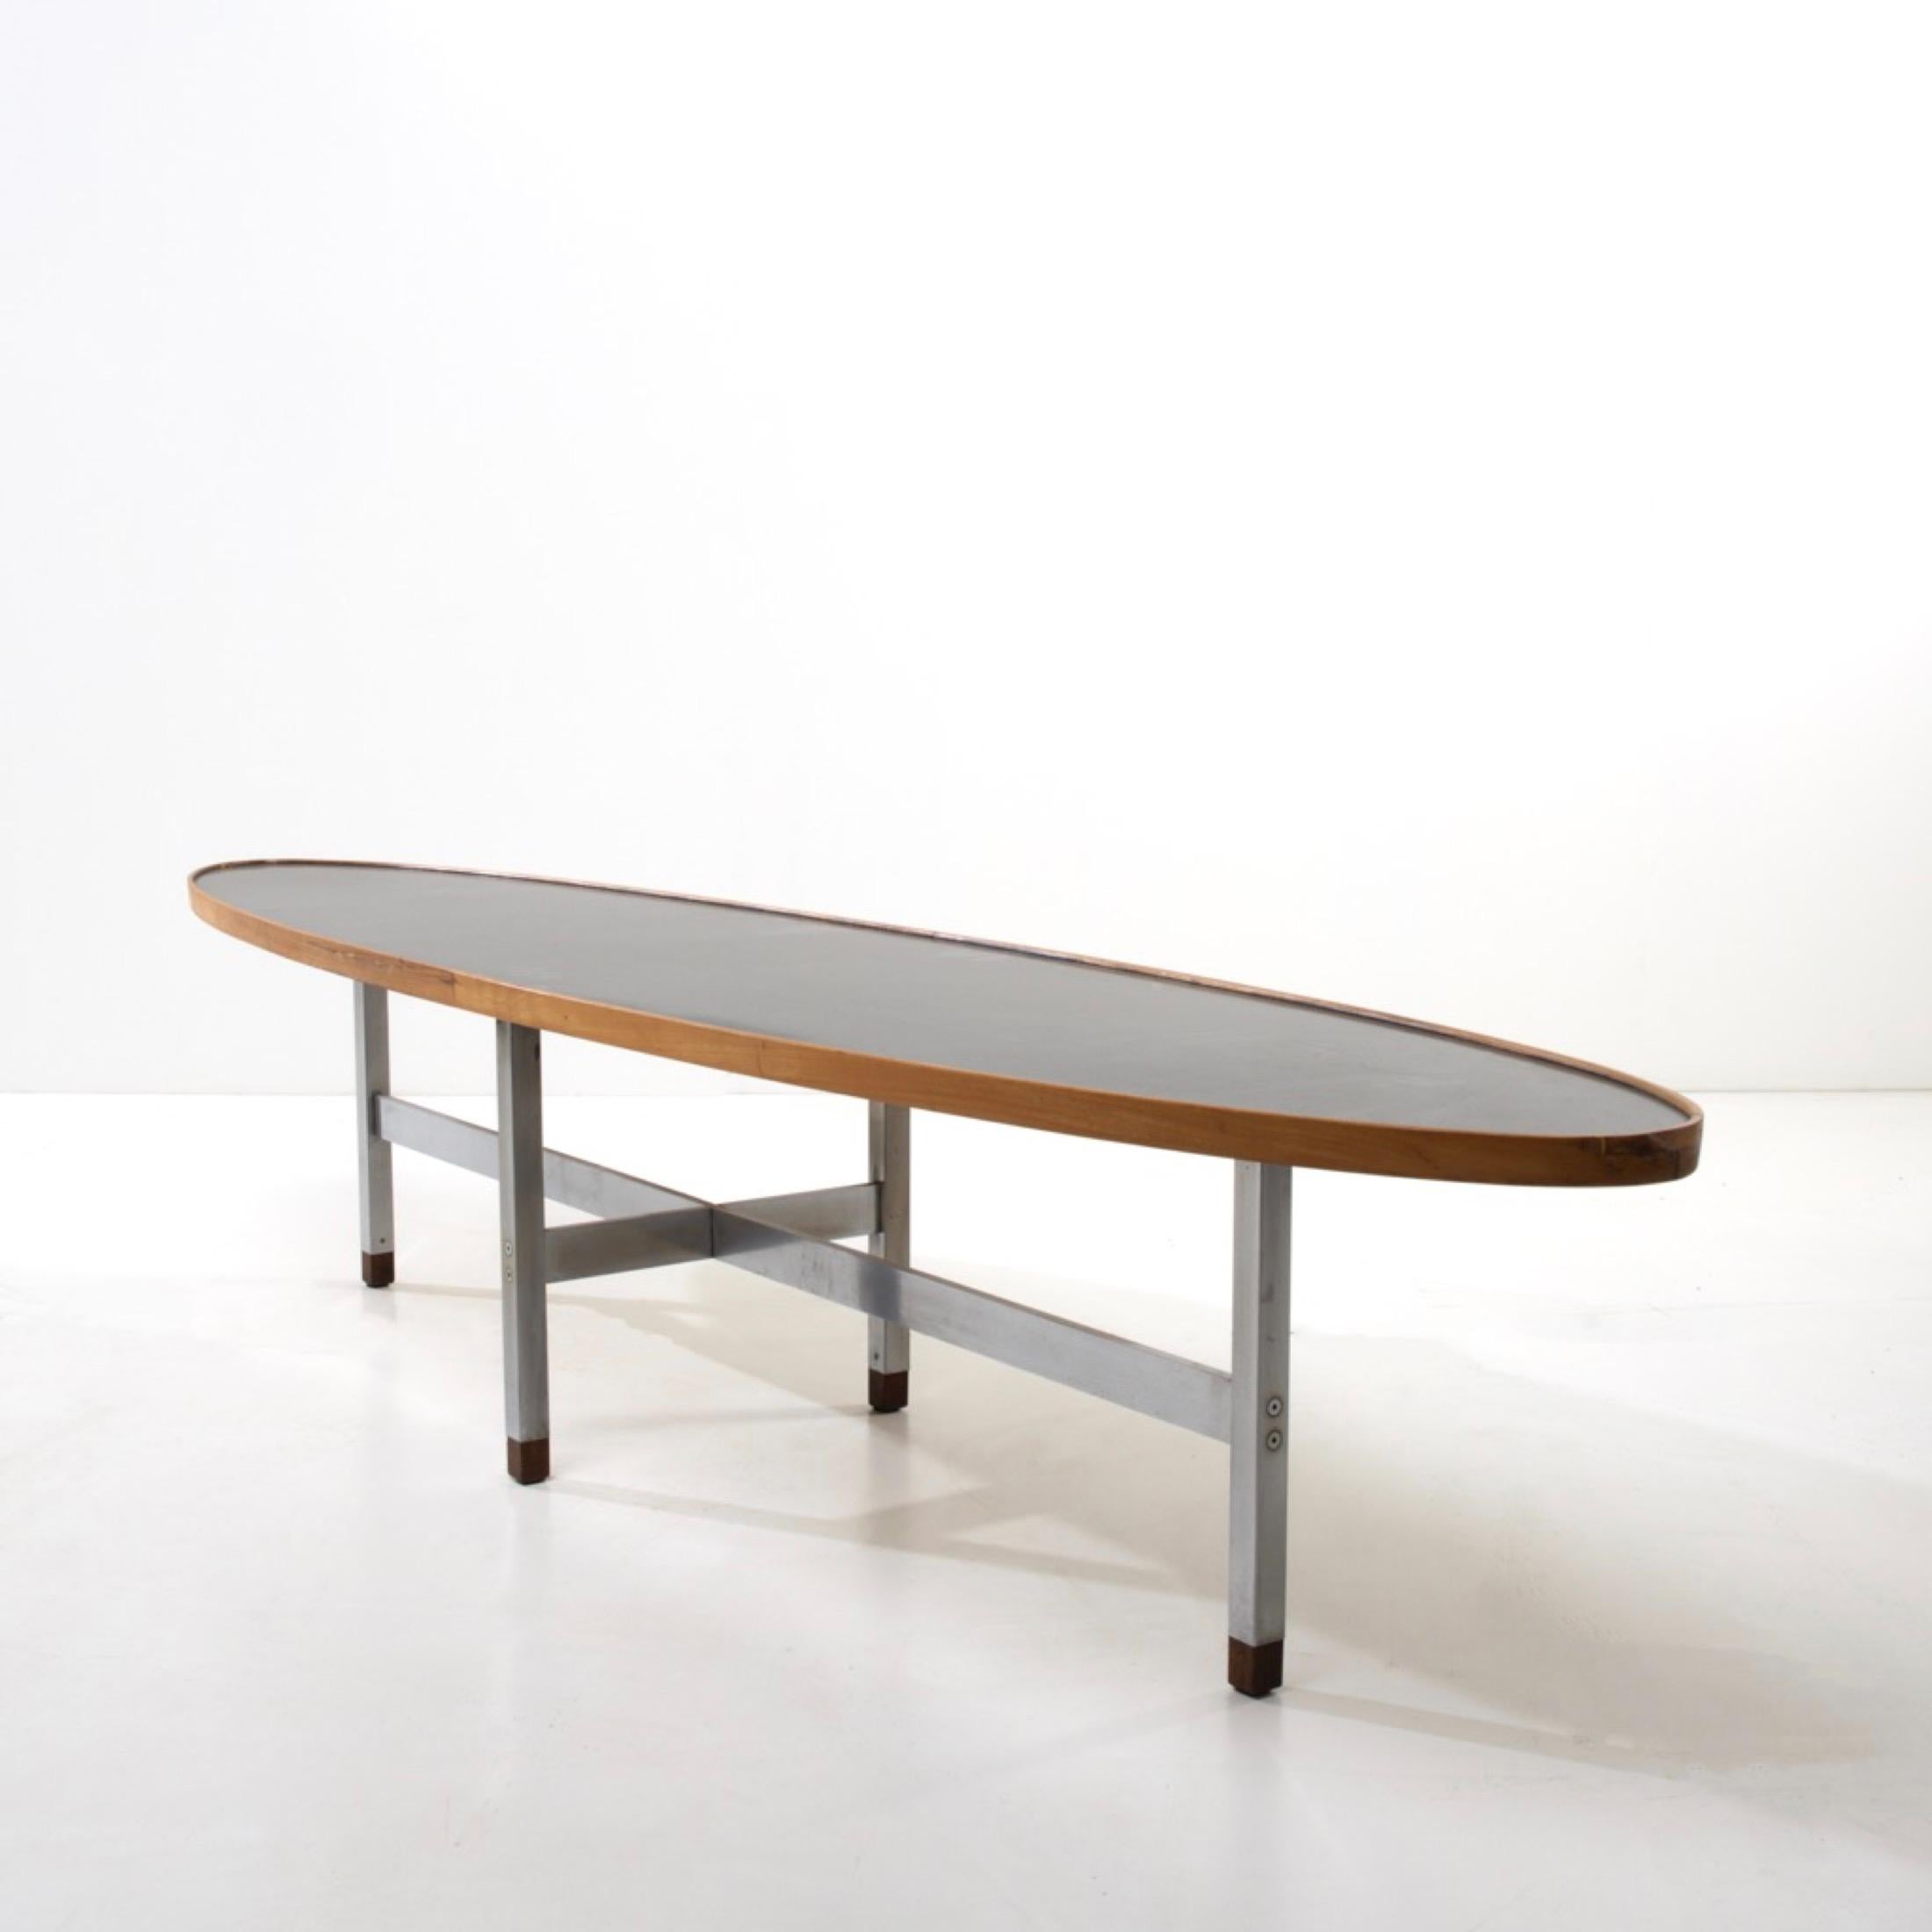 Elliptical coffee table by Edward Wormley for Dunbar In Good Condition For Sale In Brussels, BE